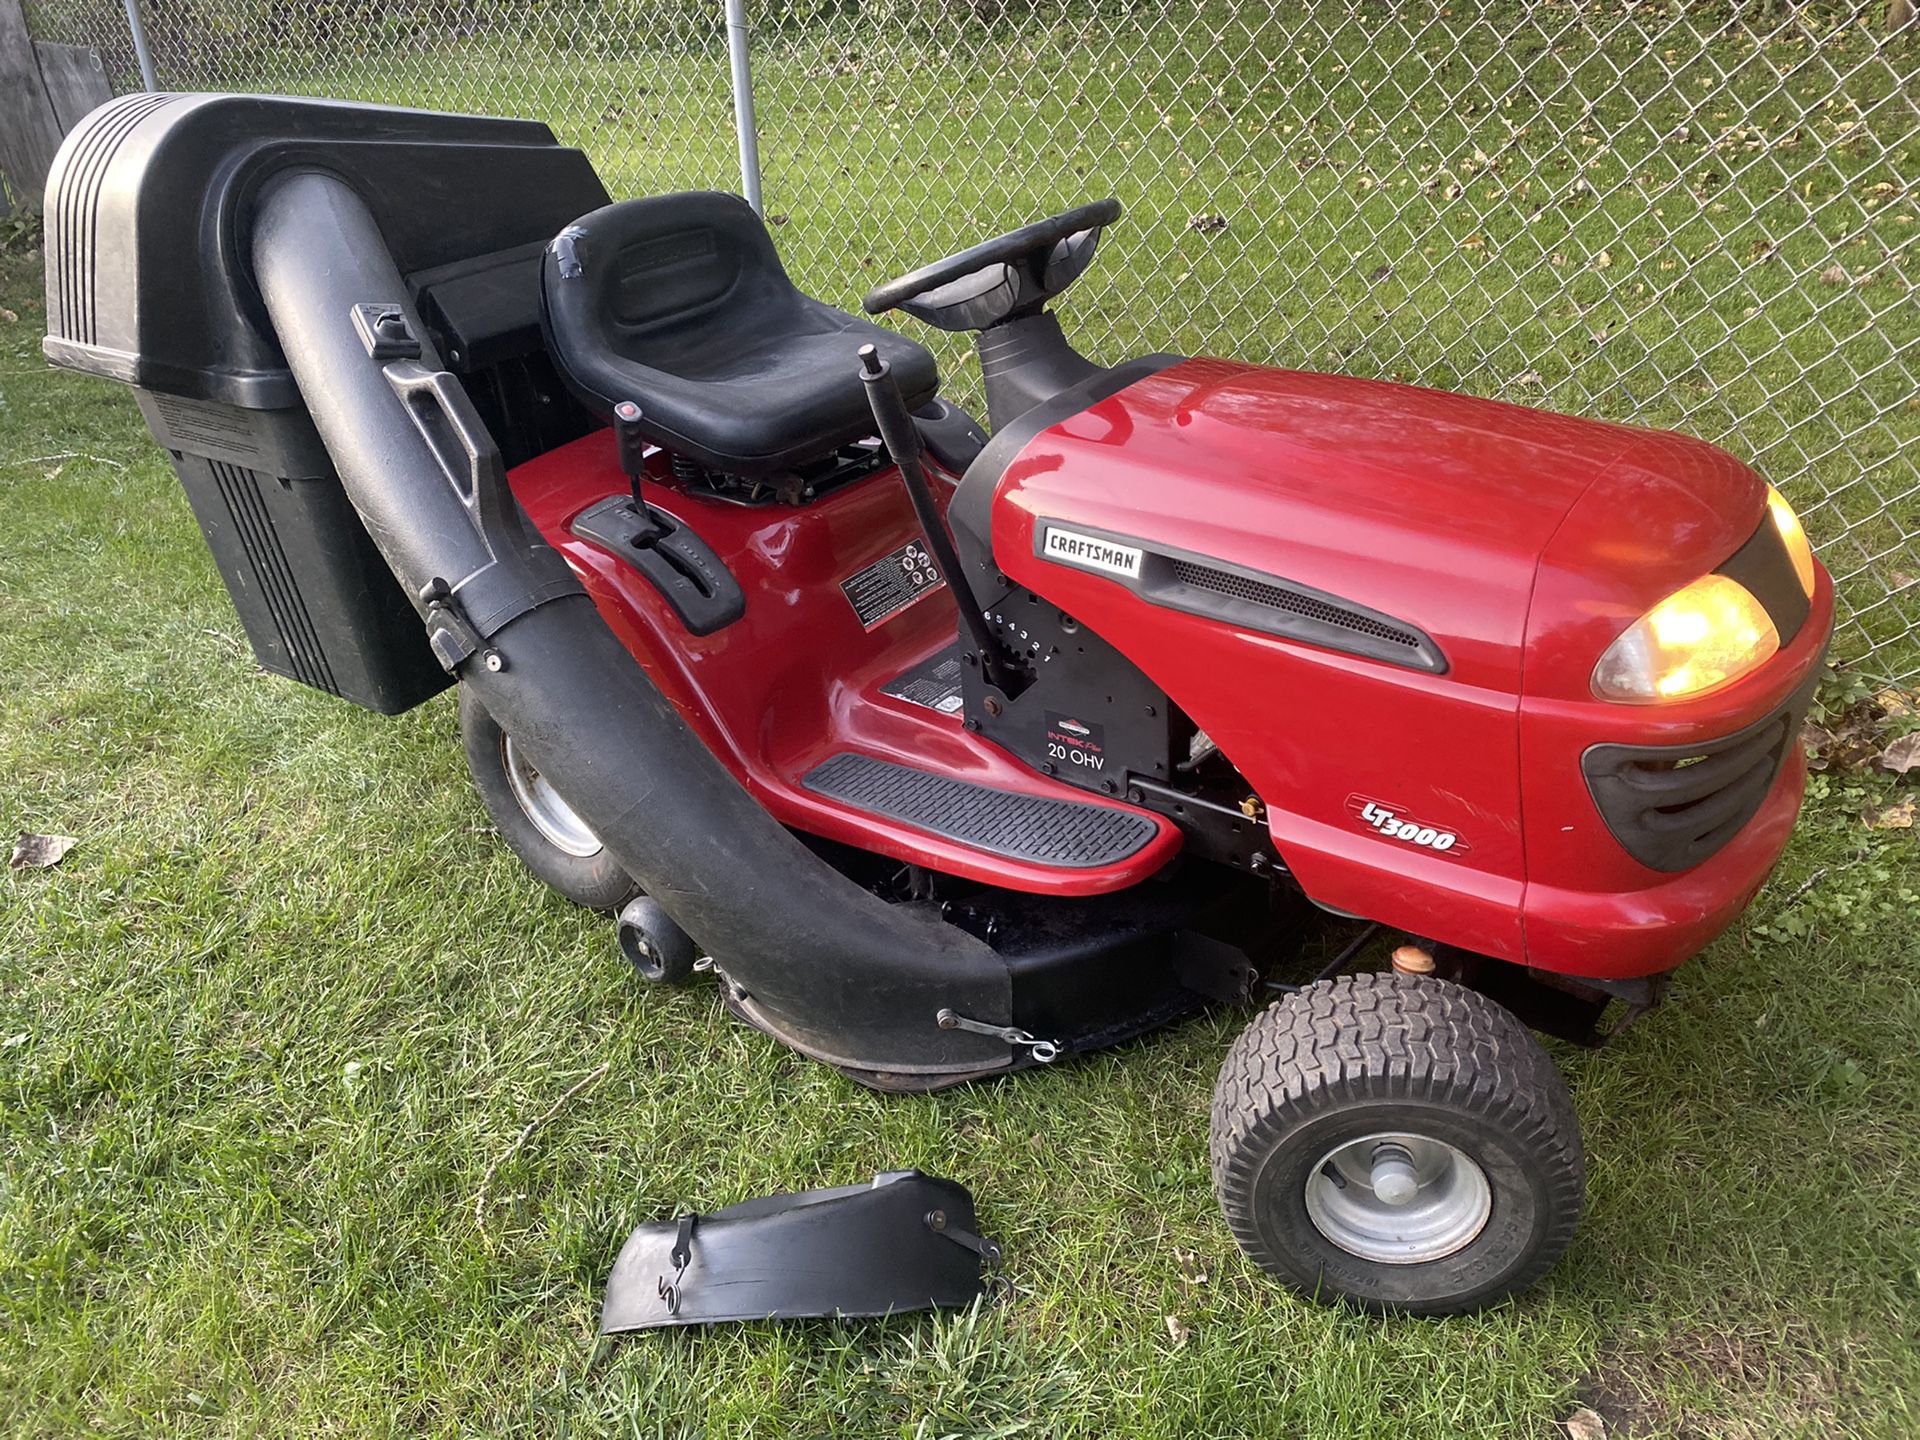 Mulching Auto Trans Riding Lawn Mower with Bagger System